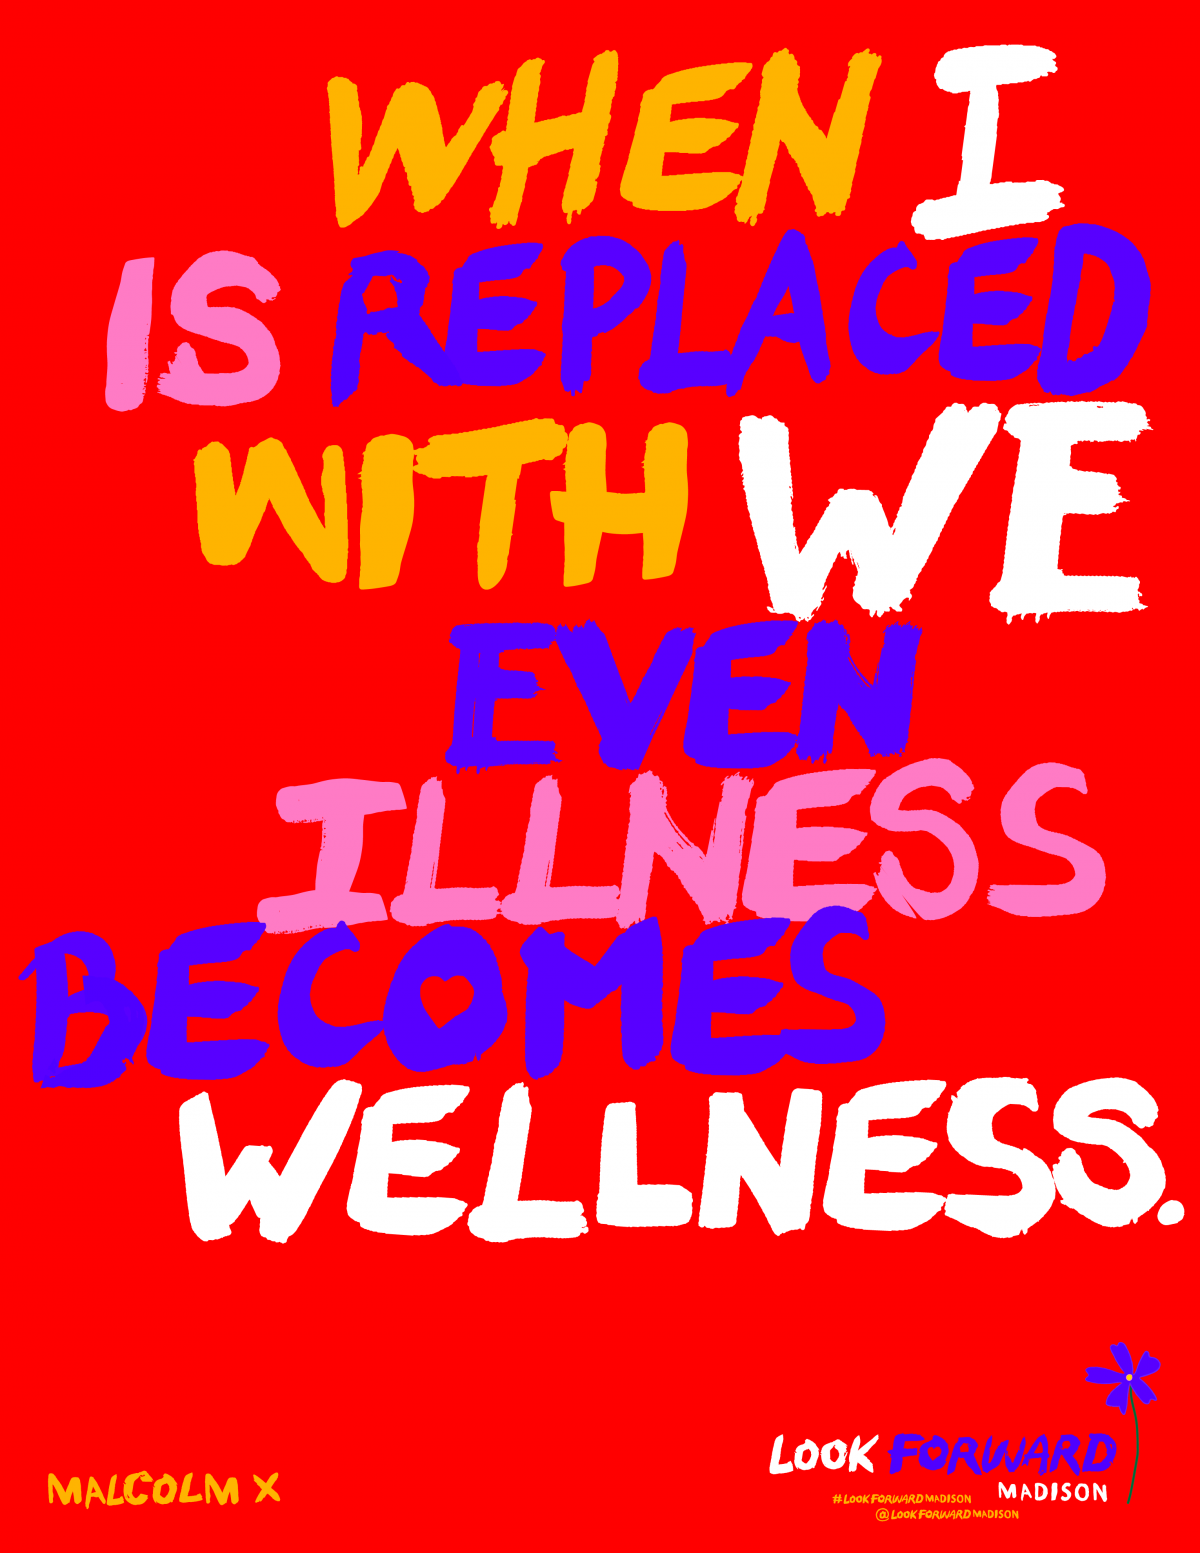 When I is replaced with We even illness becomes wellness